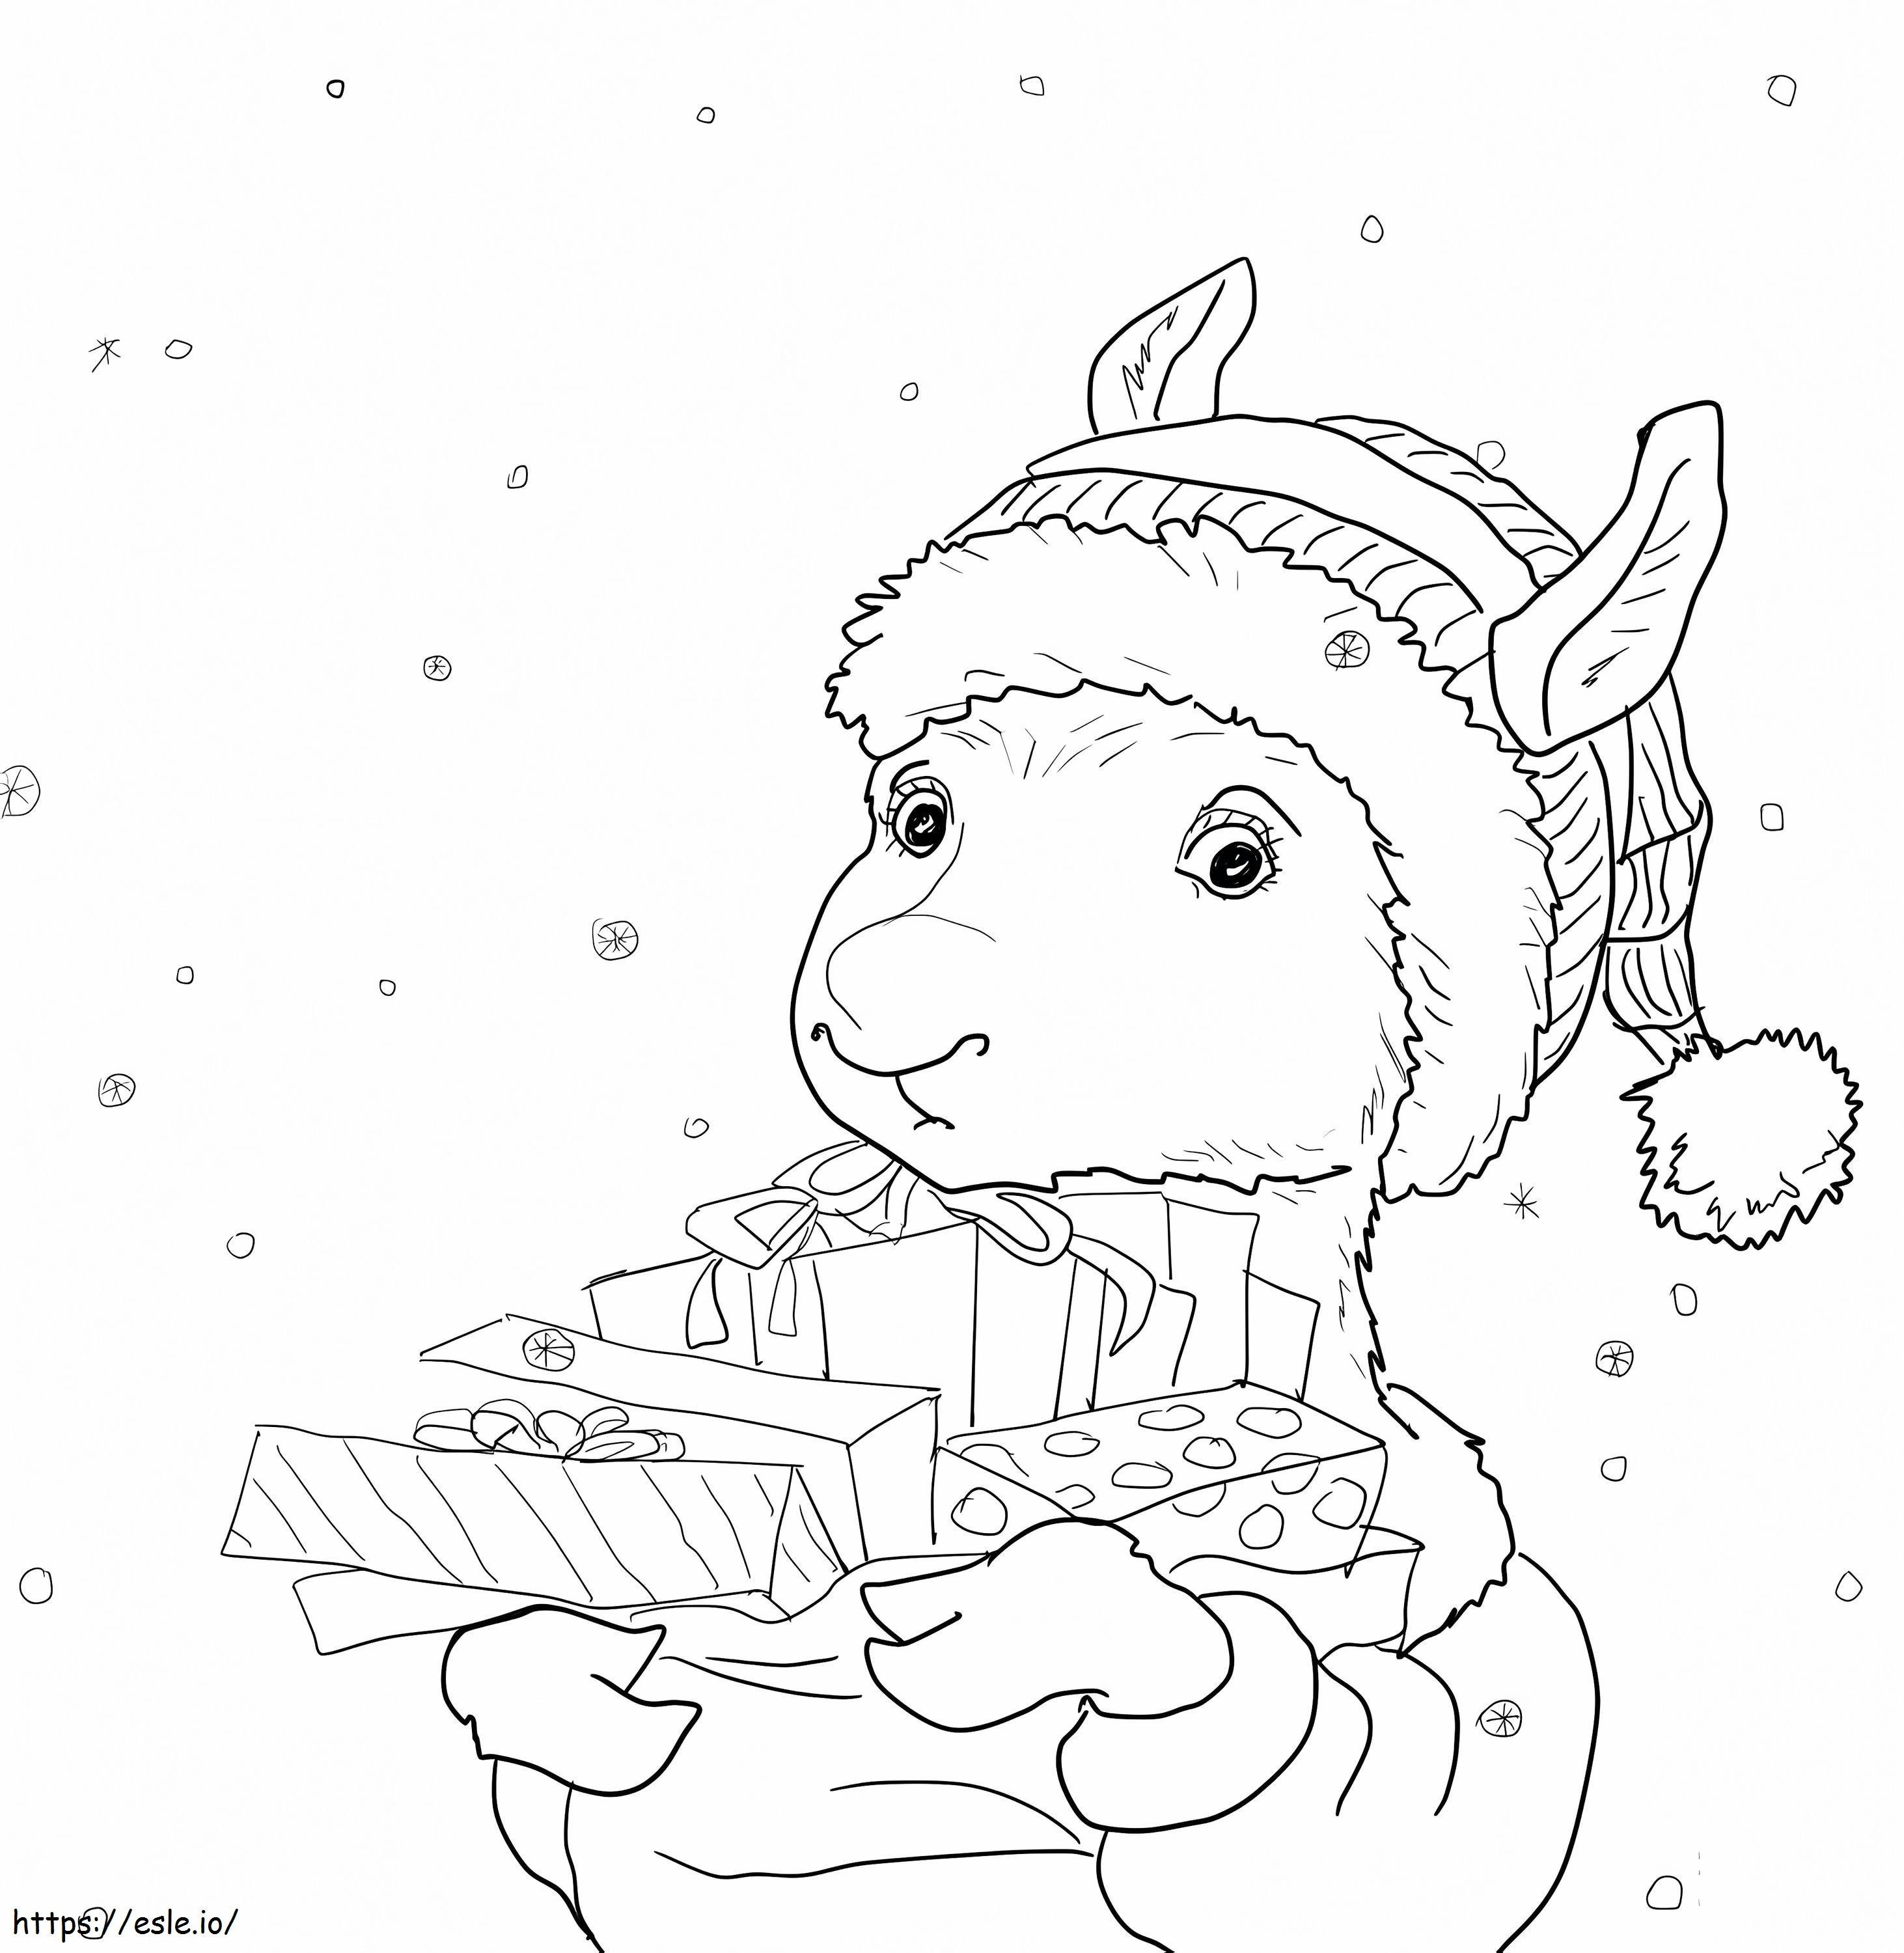 1586570979 Biypmp79T coloring page